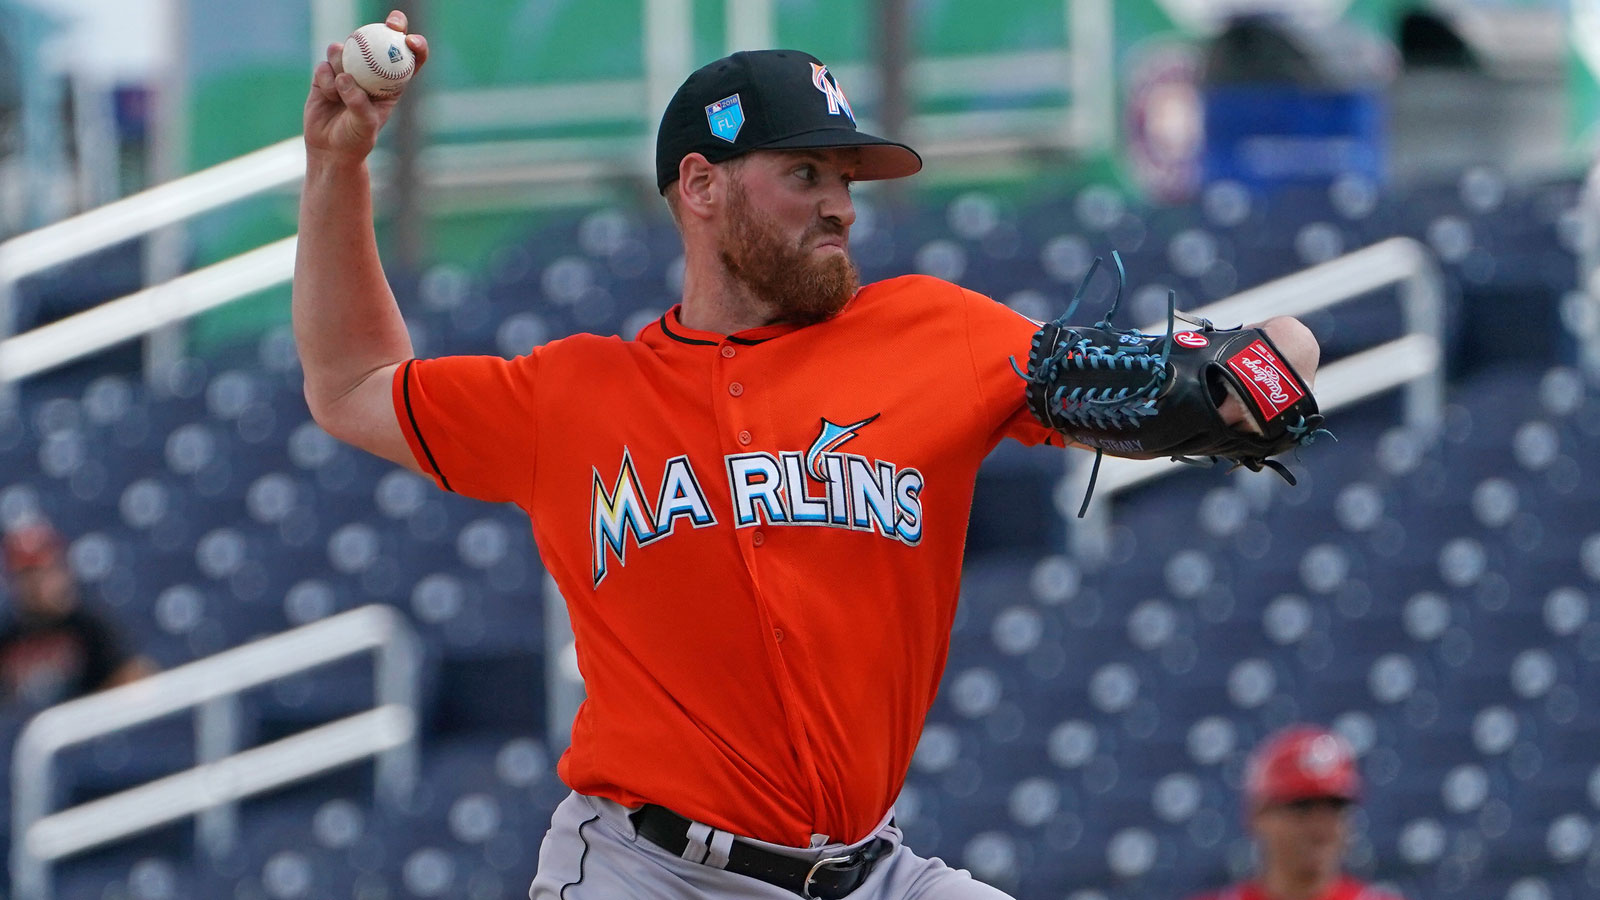 Marlins will be cautious with Dan Straily's forearm inflammation